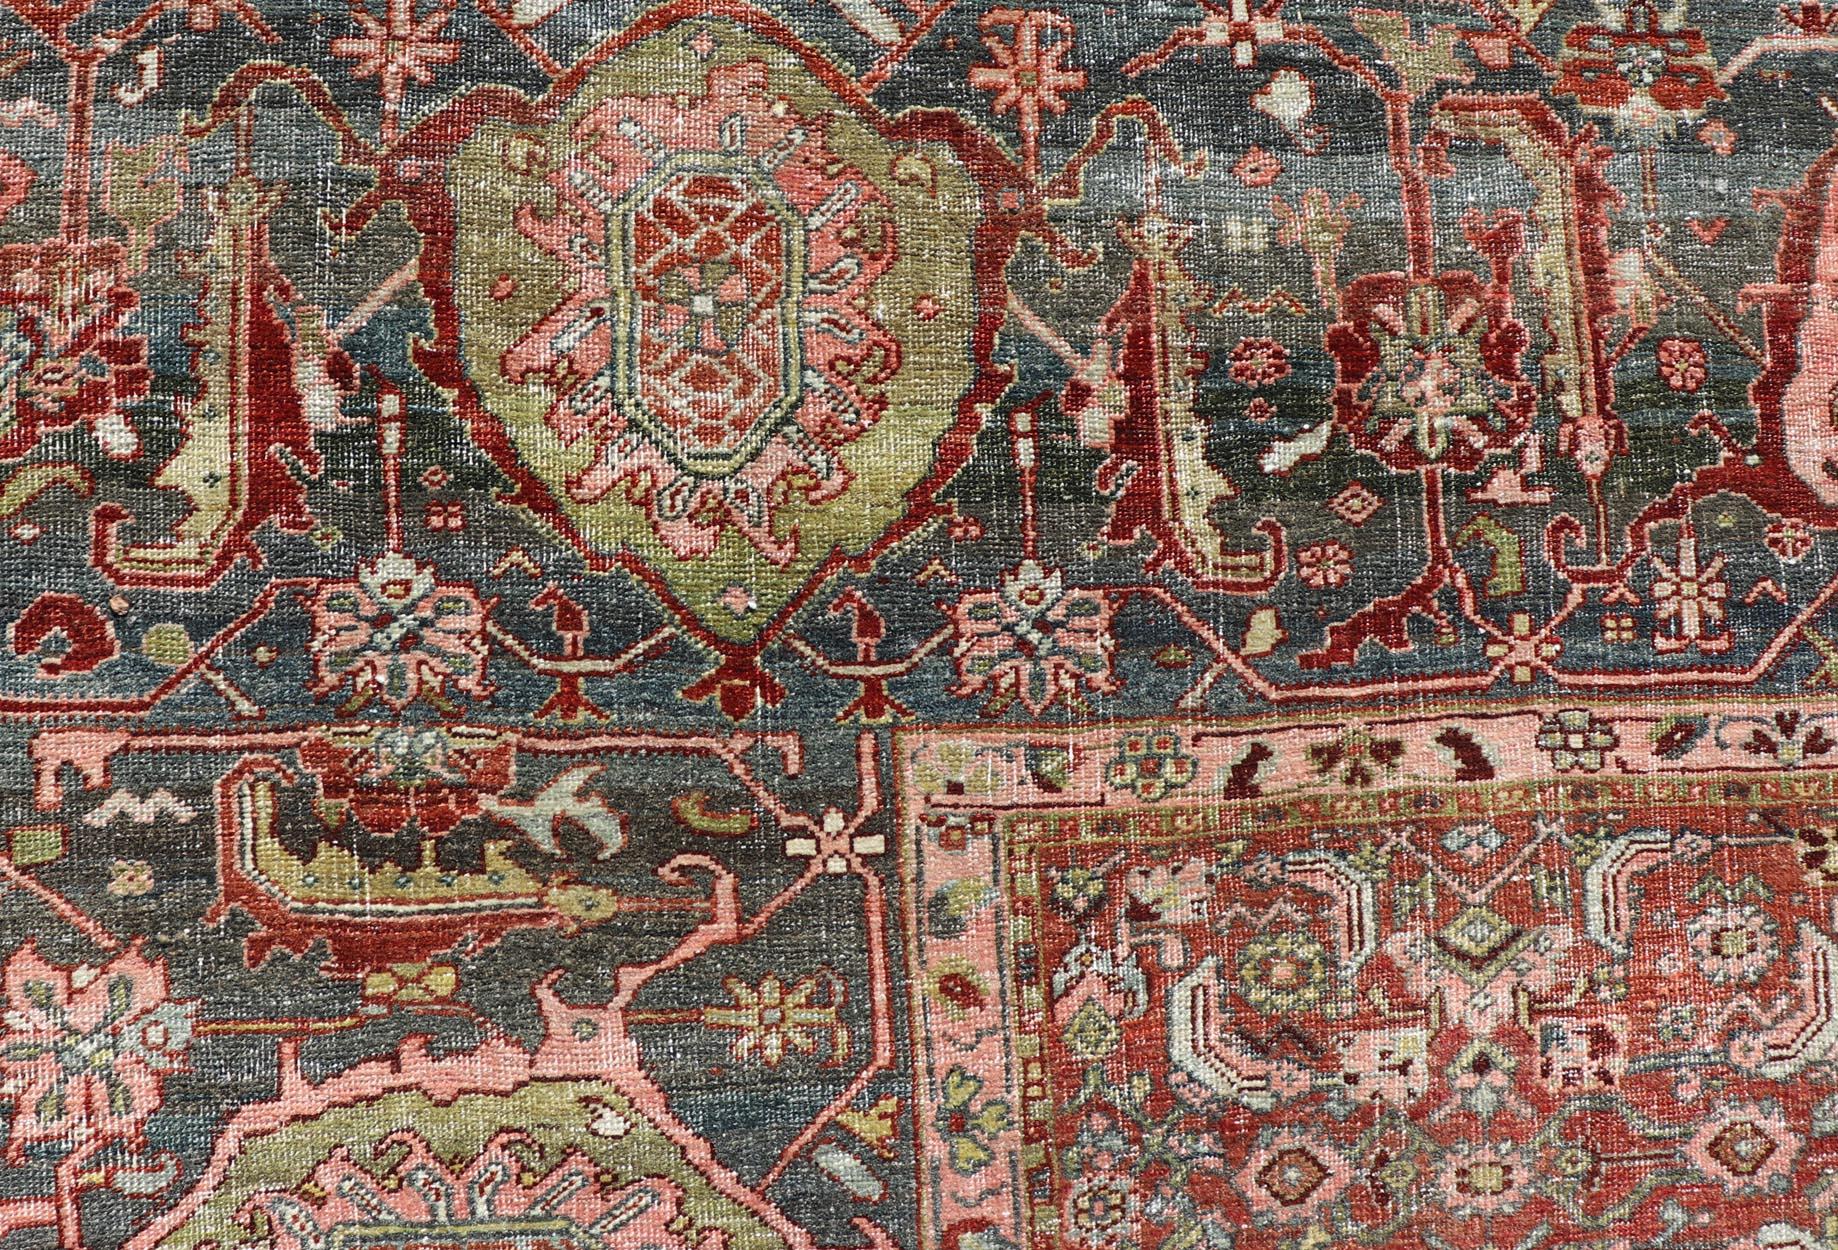 Palace Size Antique Persian Bidjar Rug in Shades of Red, Blue Grey & Lime Green For Sale 5